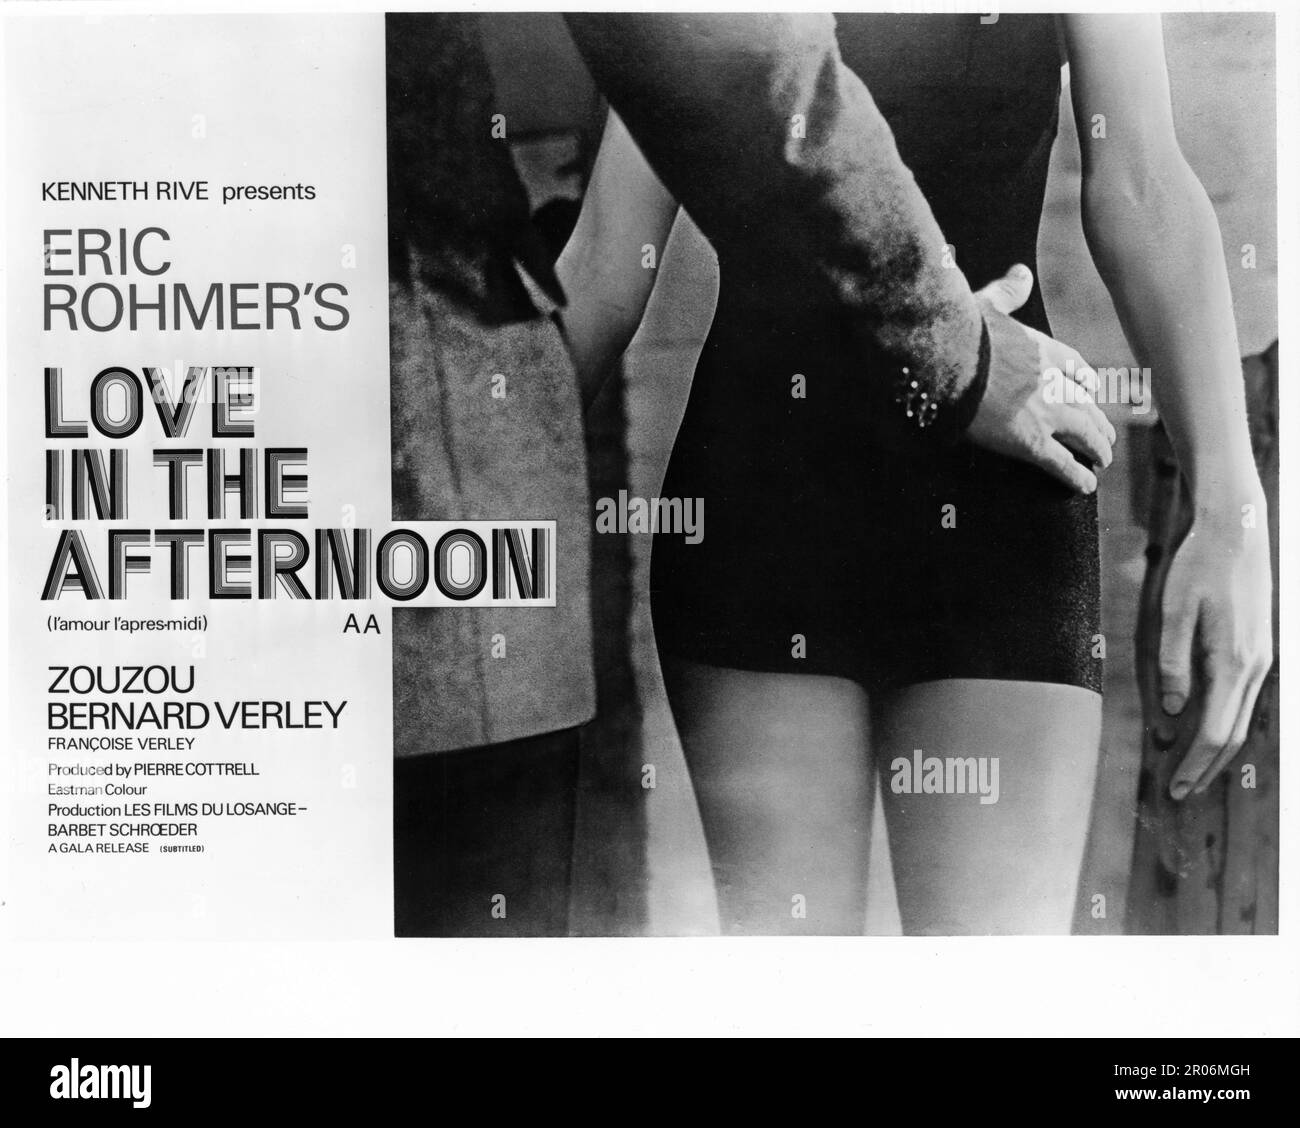 Artwork for British Quad Poster for ZOUZOU and BERNARD VERLEY in LOVE IN THE AFTERNOON / L'AMOUR L'APRES MIDI / CHLOE IN THE AFTERNOON 1972 director / writer ERIC ROHMER Les Films du Losange presenter Kenneth Rive A Gala Release Stock Photo